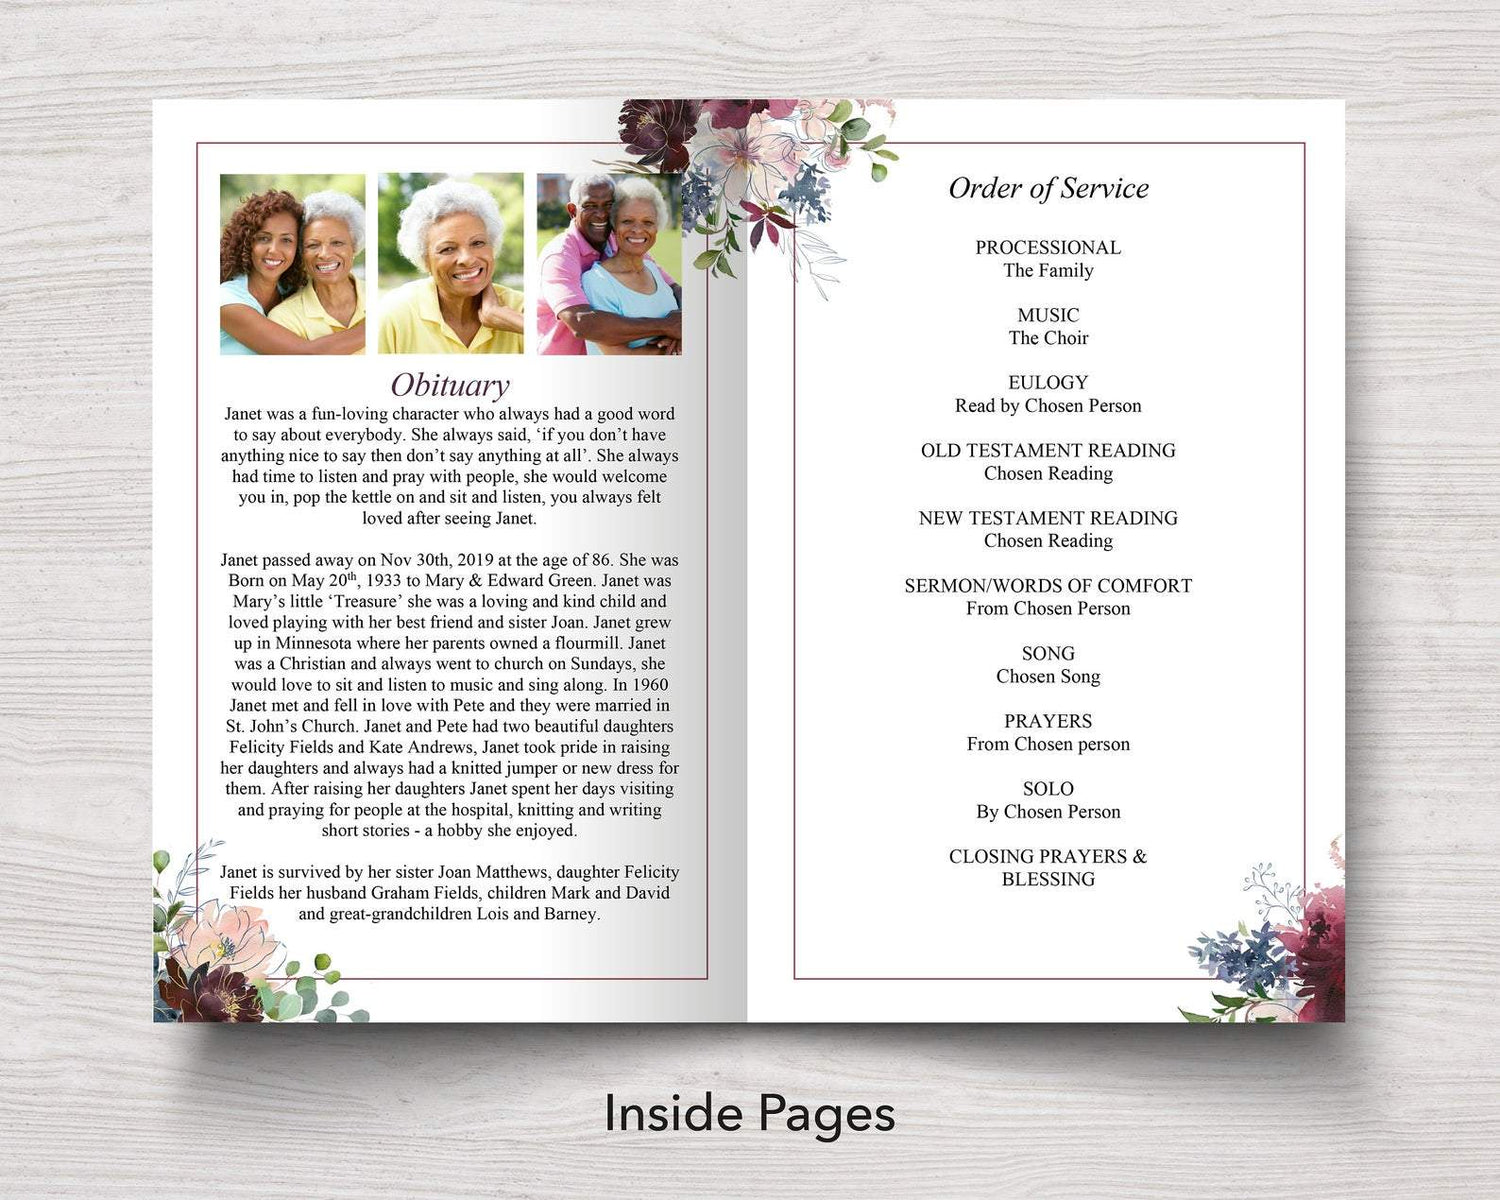 4 Page Autumnal Funeral Program Template